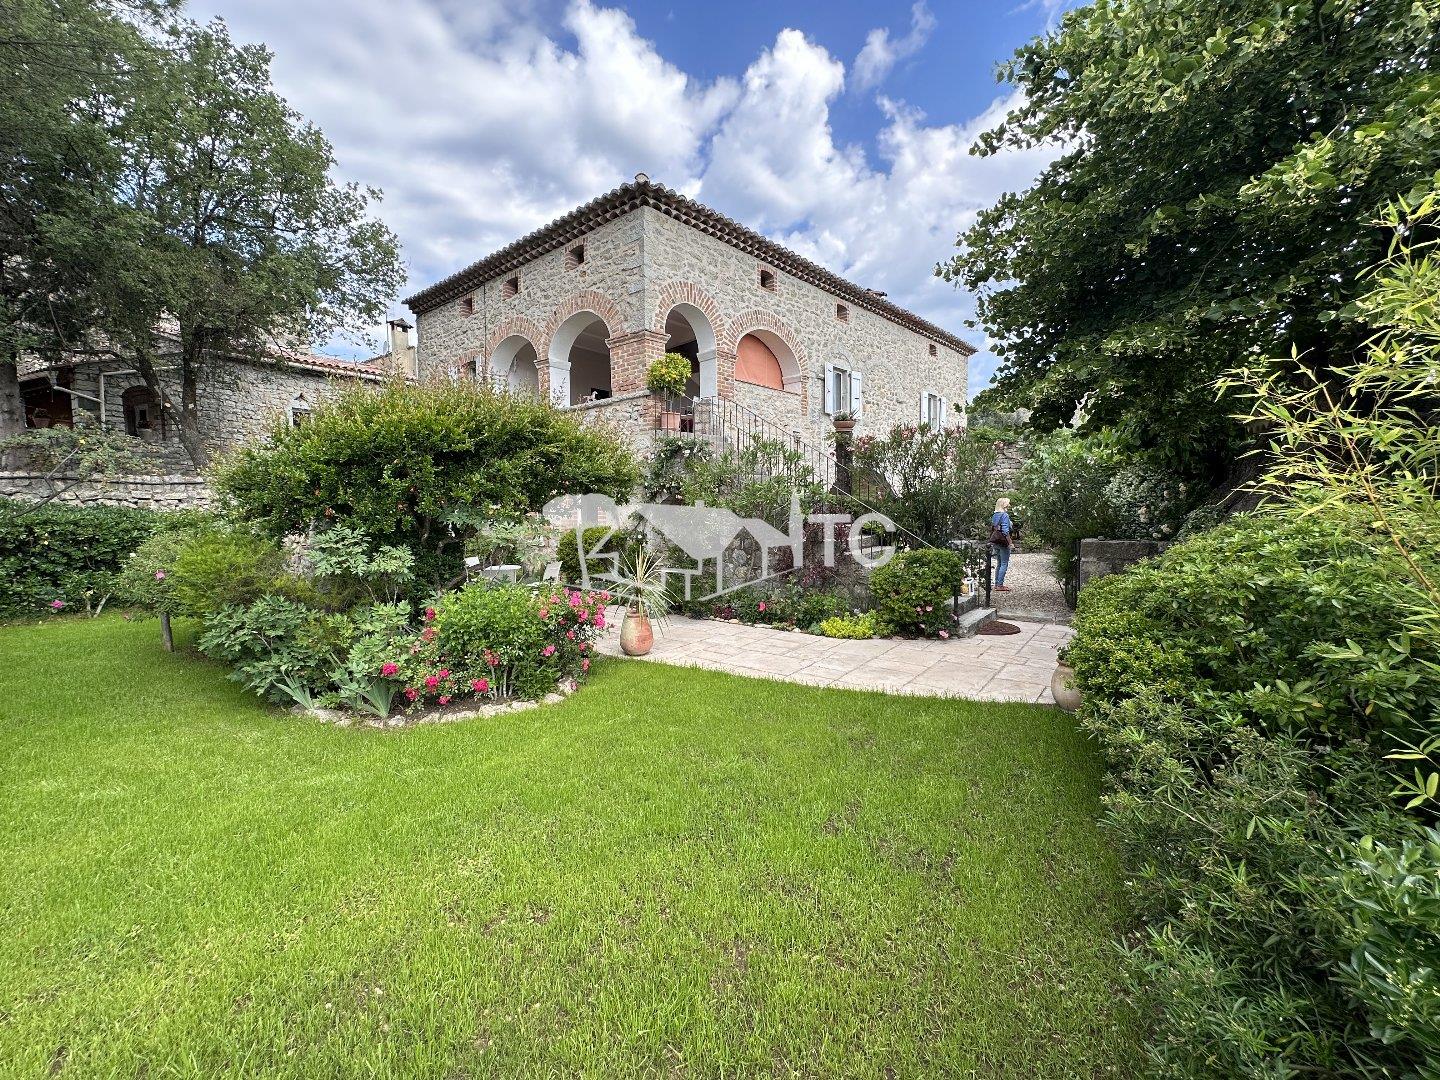 Charming 18th-century property, 270m² living space